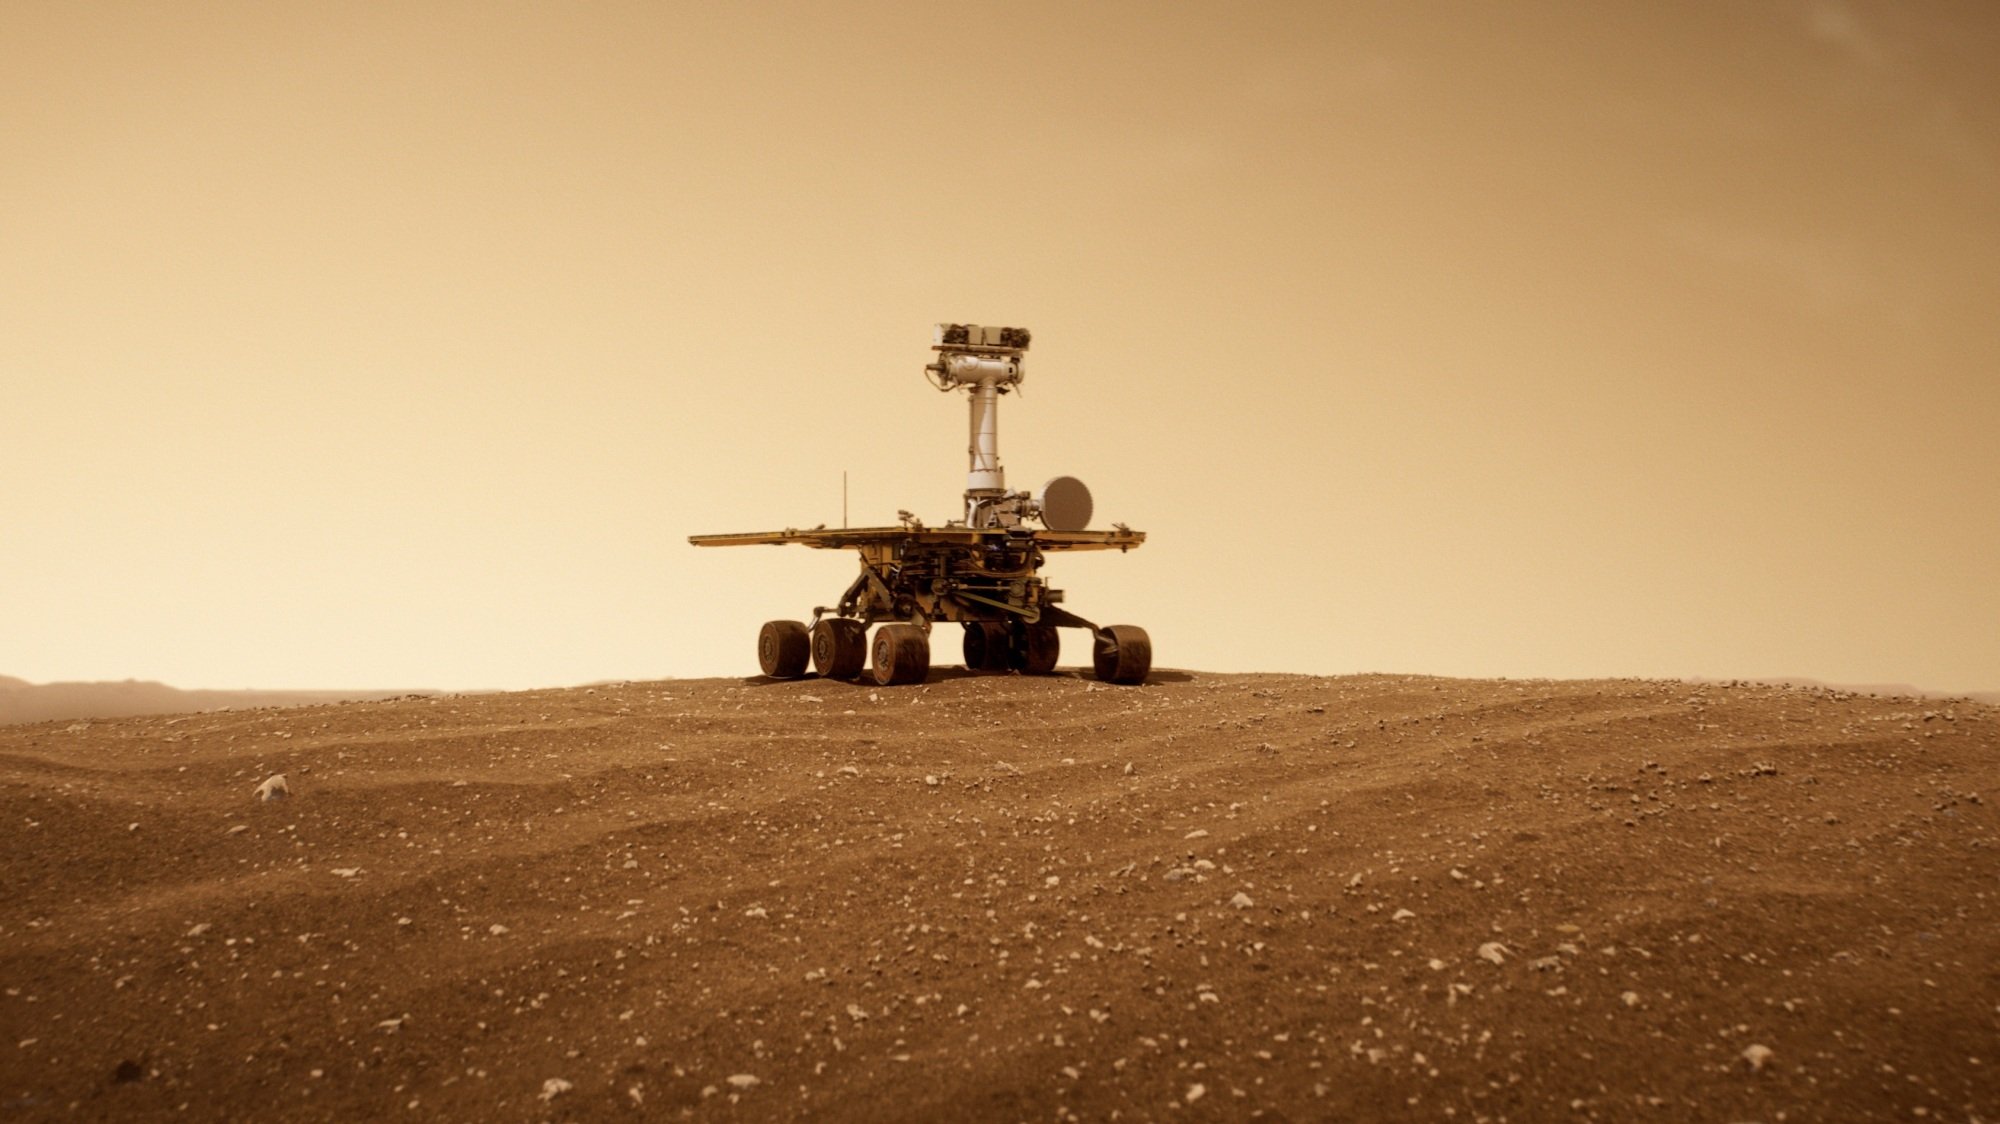 The Opportunity rover on the sandy surface of Mars.